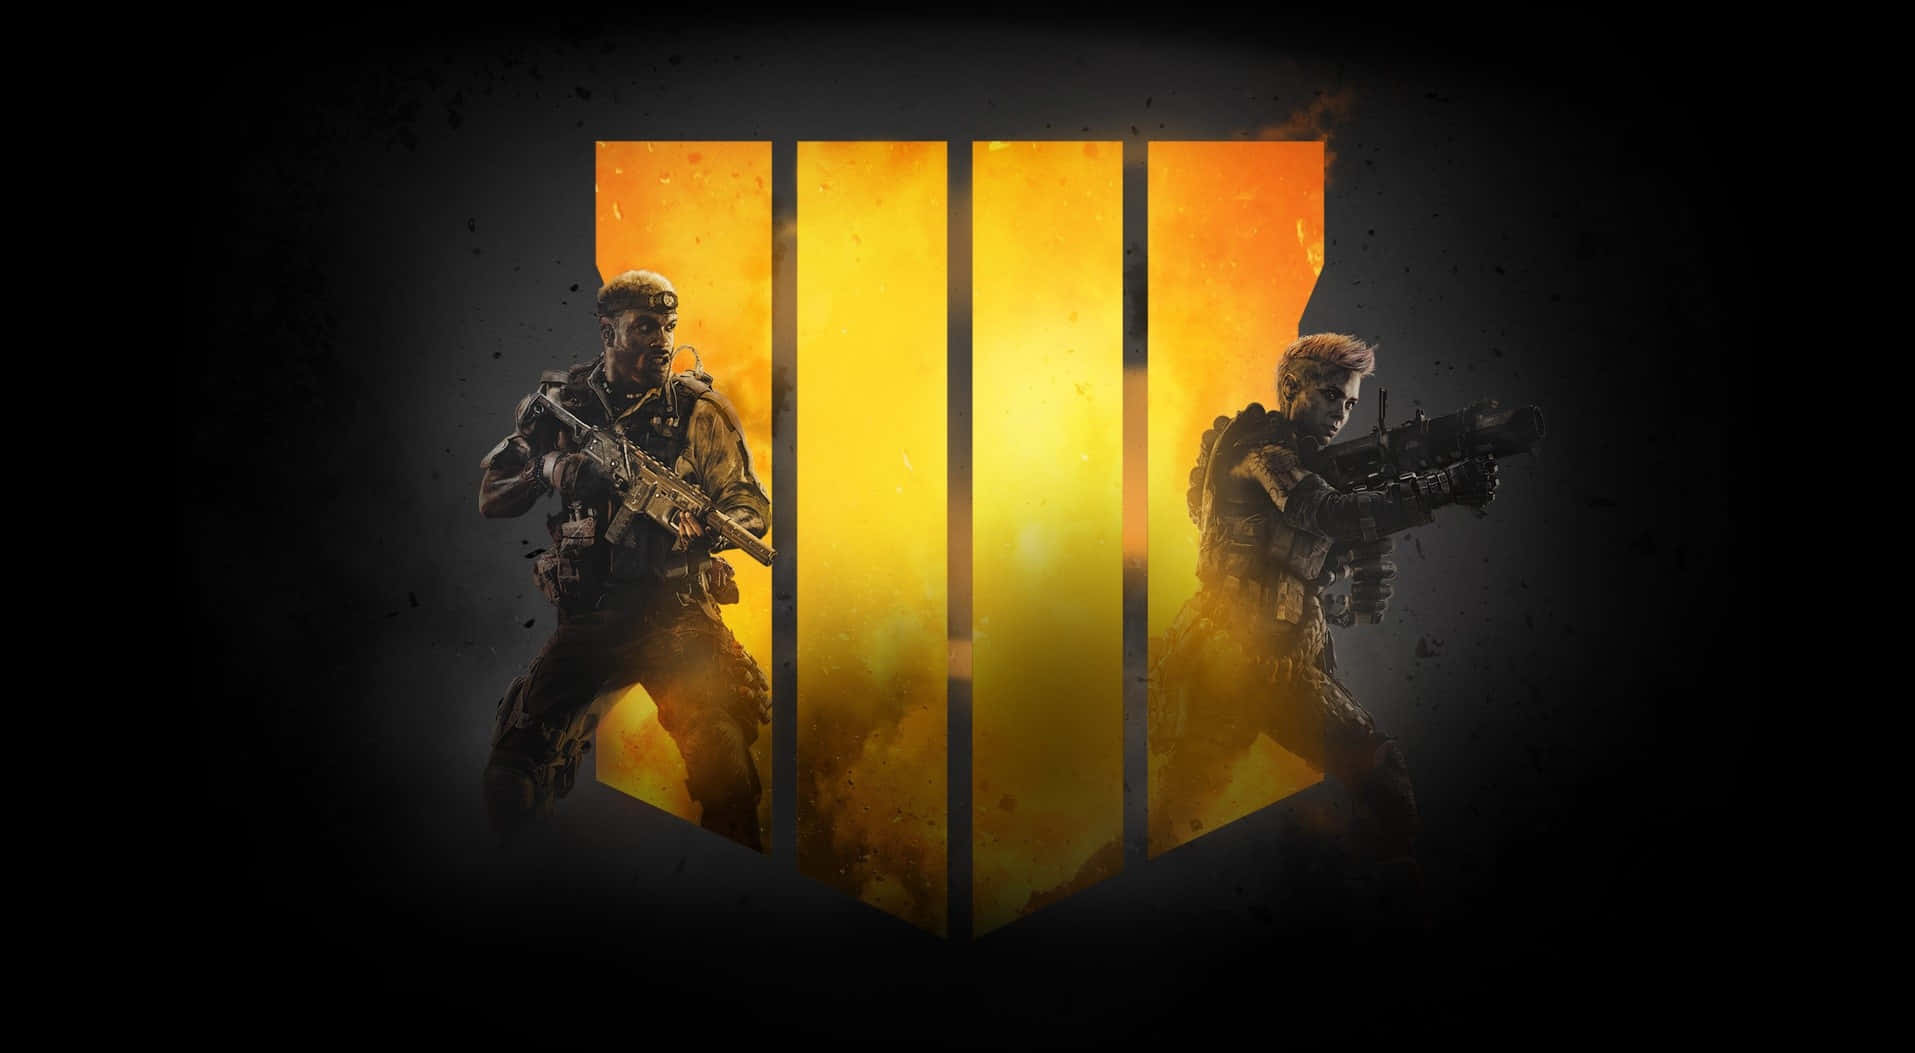 Get ready for explosive warfare in Call of Duty Black Ops 4